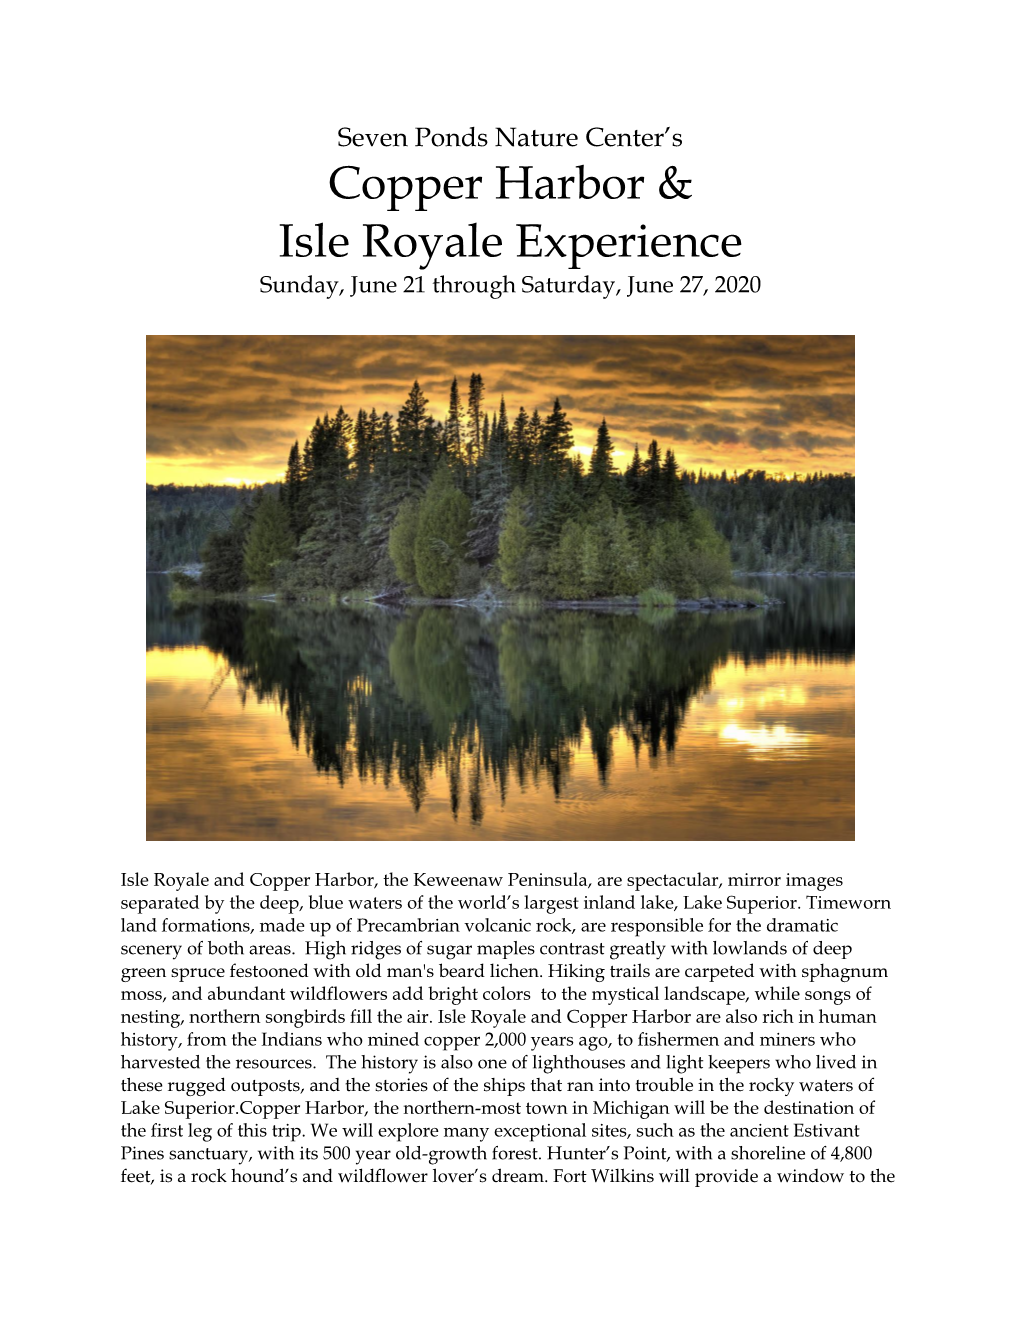 Copper Harbor & Isle Royale Experience